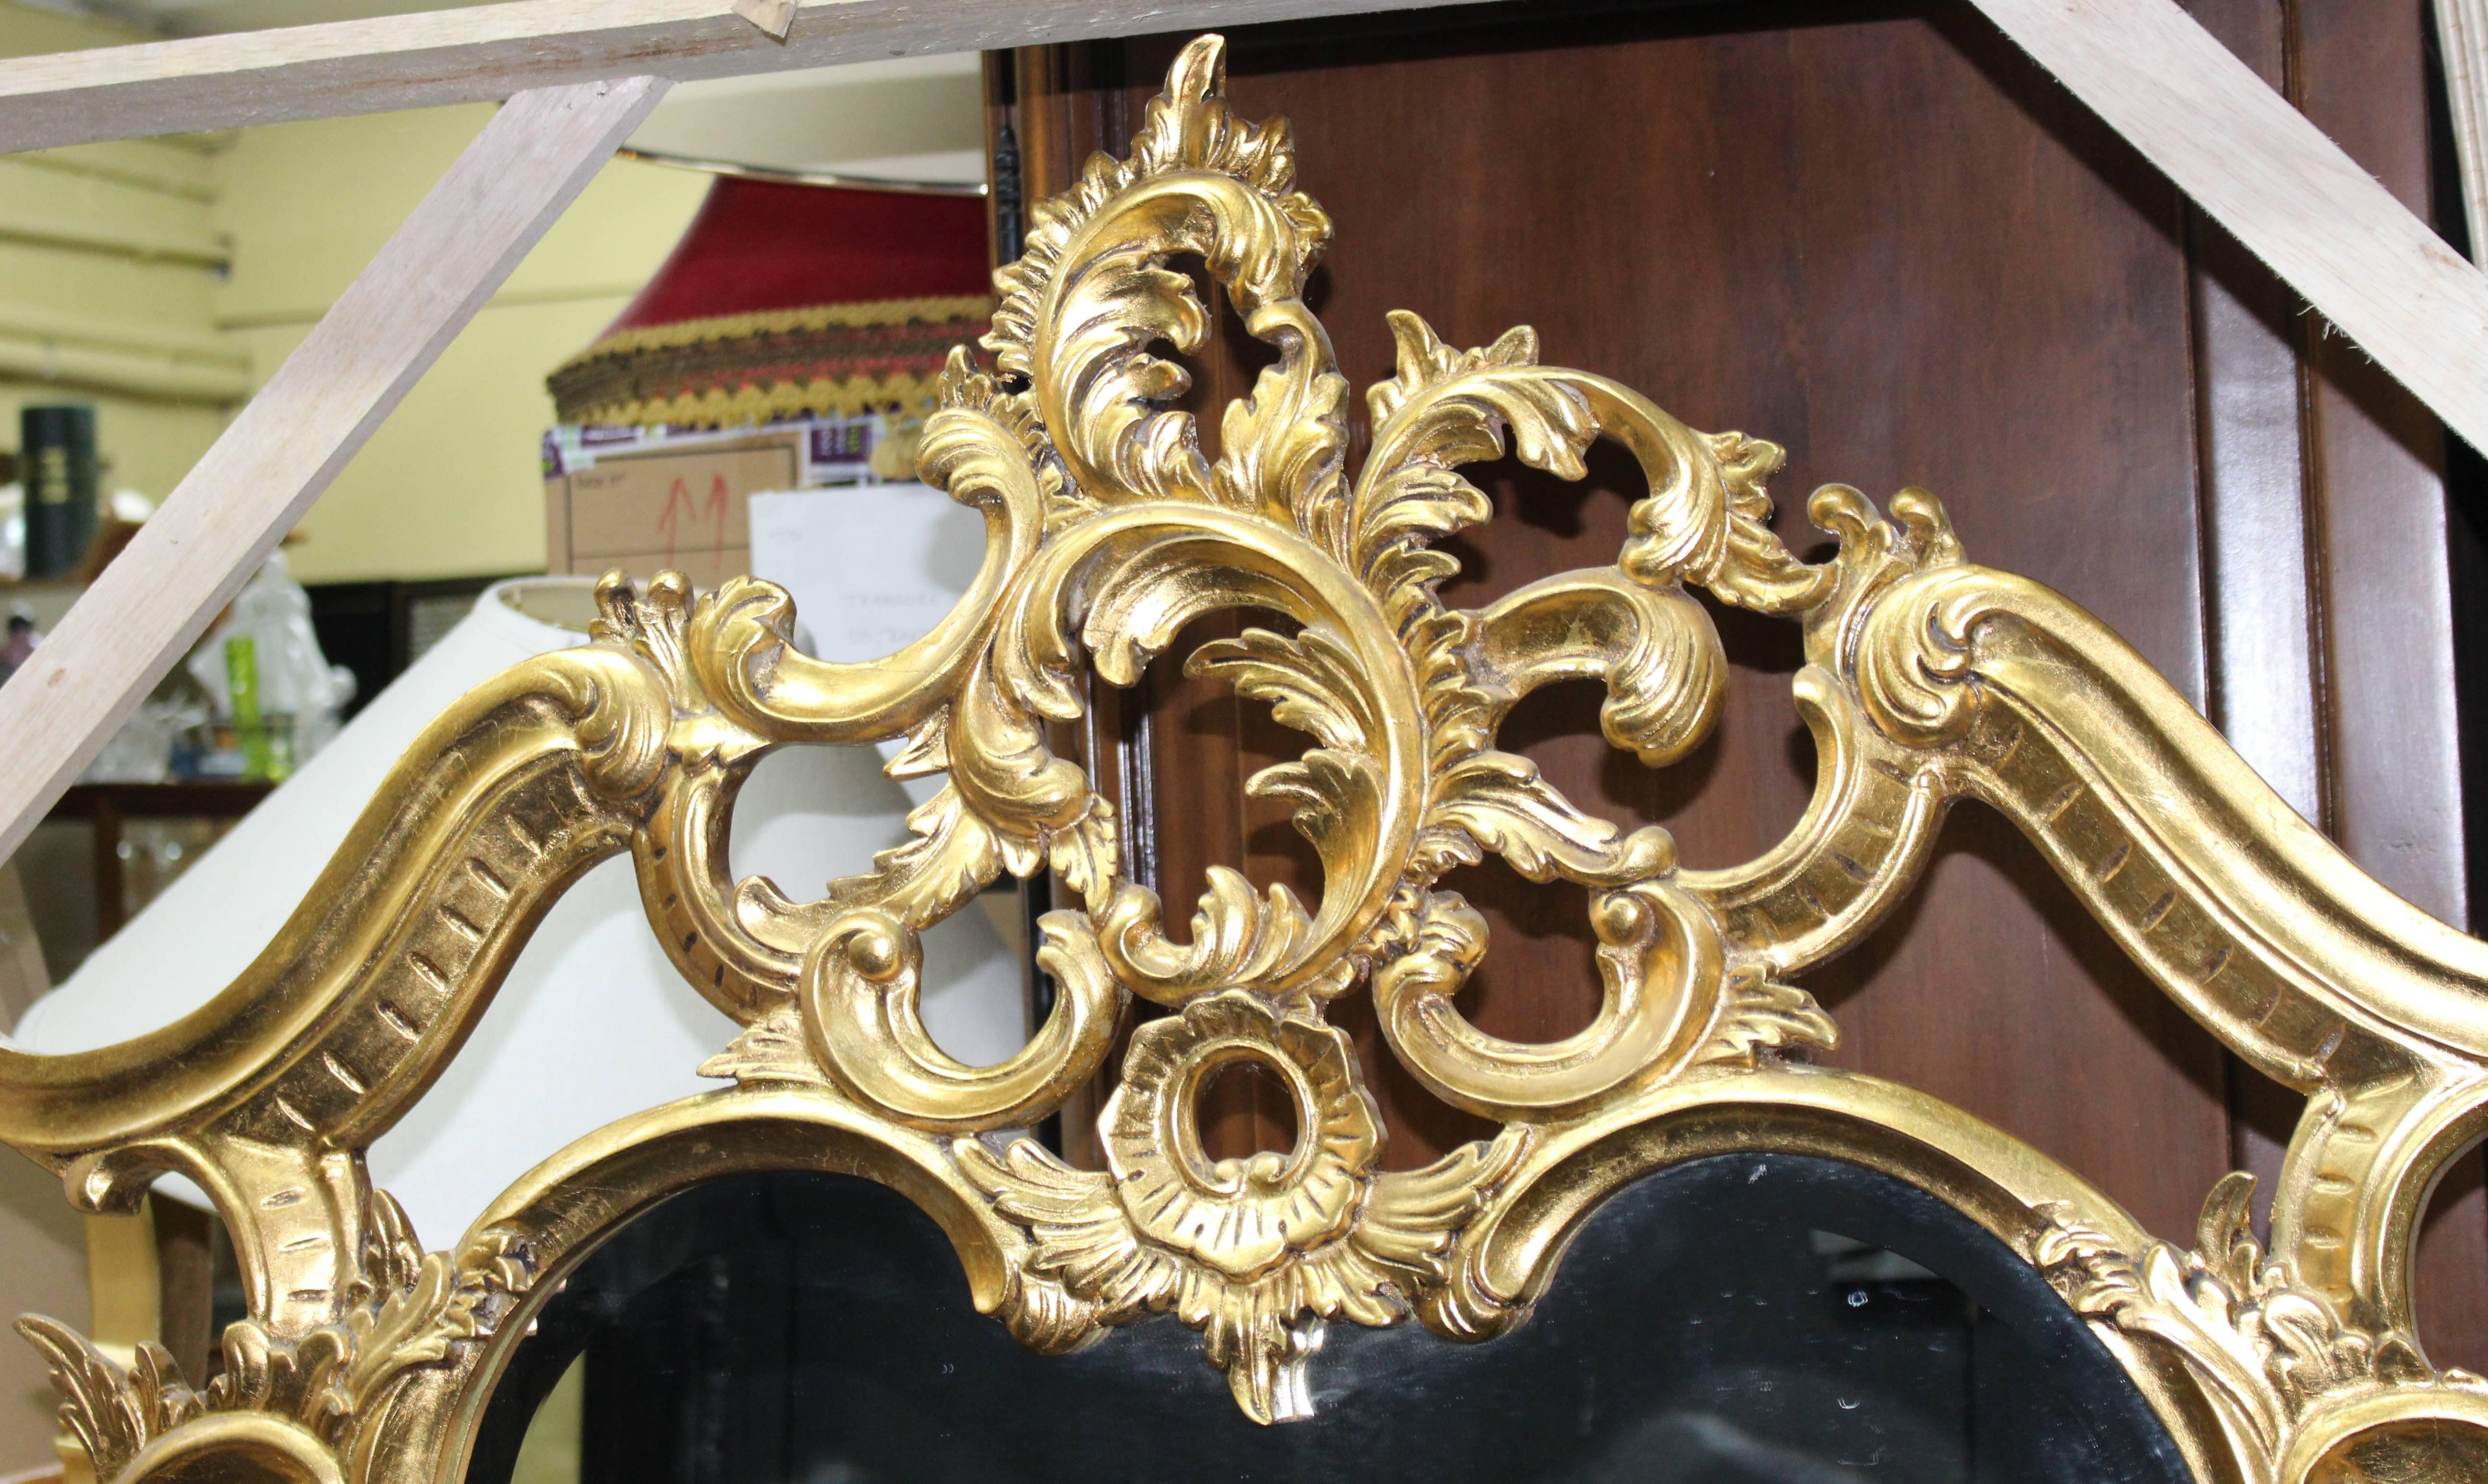 Measures: Width 100 cm 39 1/2 in
height 162 cm 64 in




Style Antique style
Composition carved wood, gilt gold leaf
Condition very good condition




Handsome large gilt pier glass. Carved wood with gilt gold leaf finish.

Good